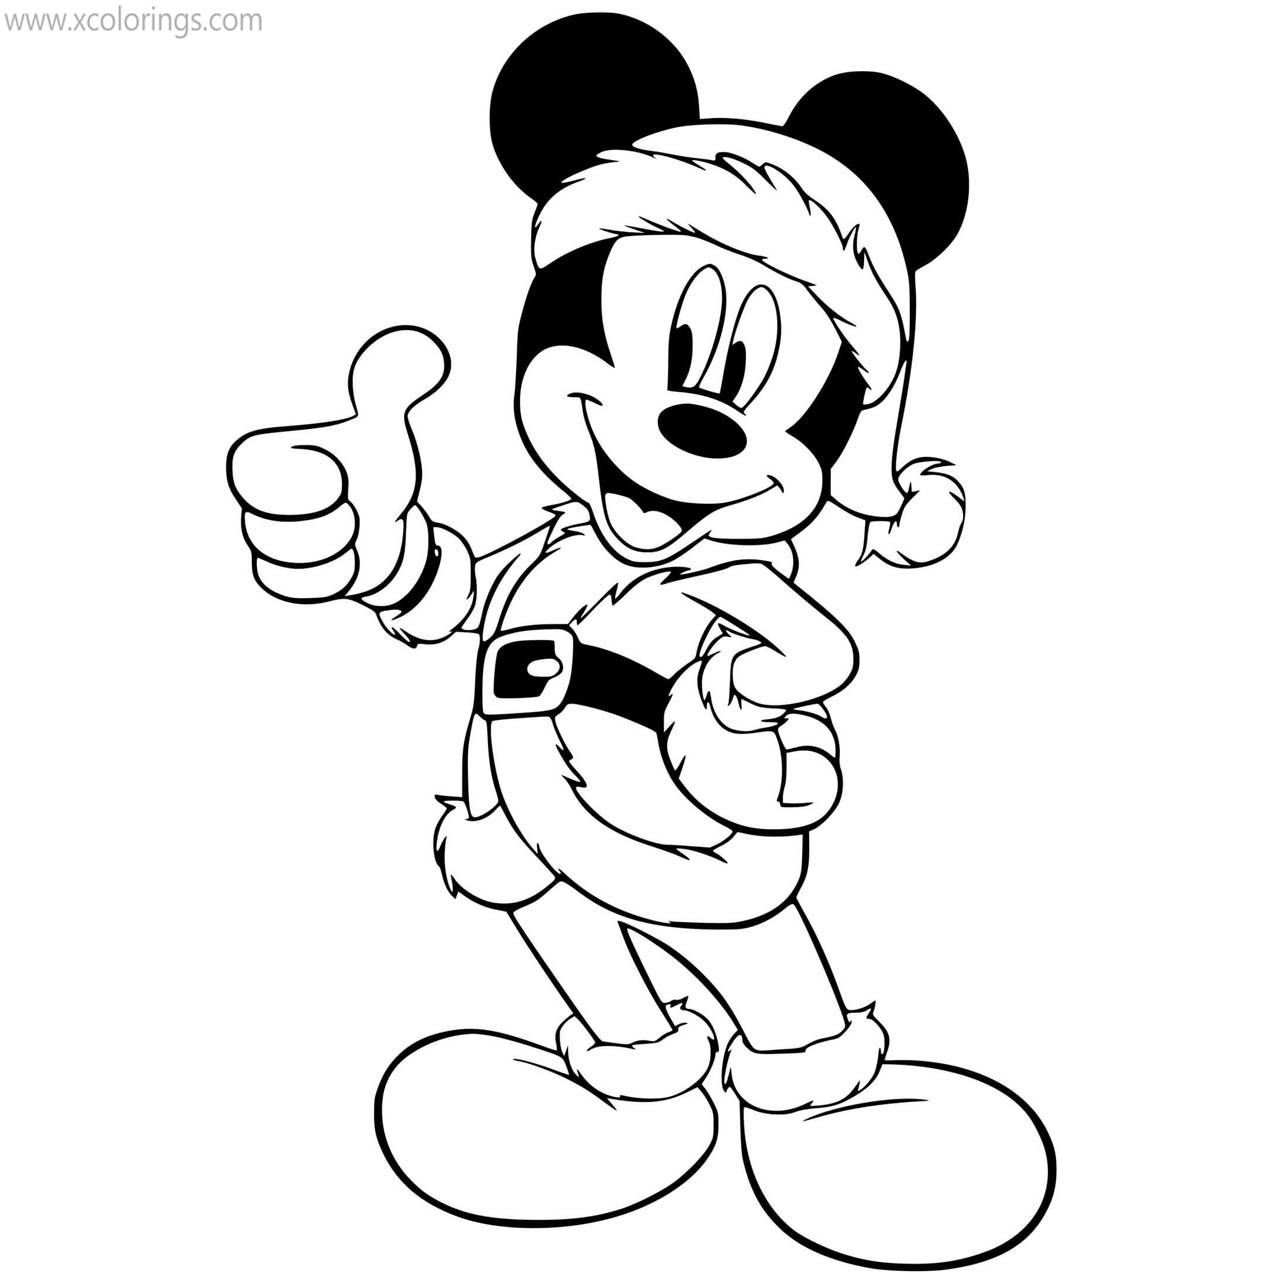 Free Mickey Mouse Christmas Coloring Pages As A Santa Claus printable